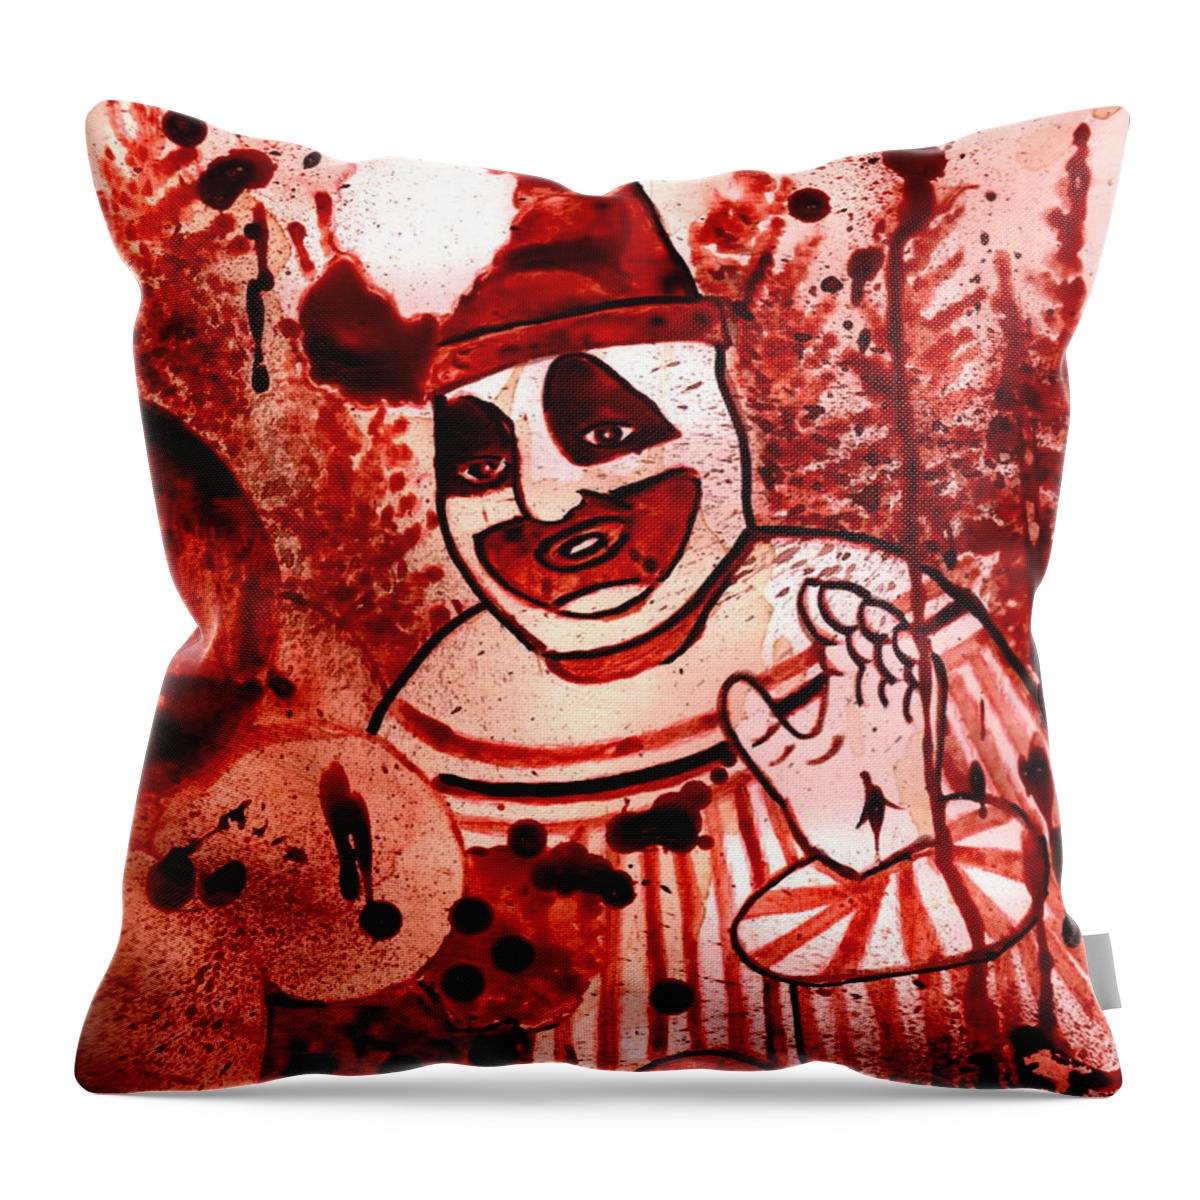  Throw Pillow featuring the painting Pogo Painted In Human Blood by Ryan Almighty